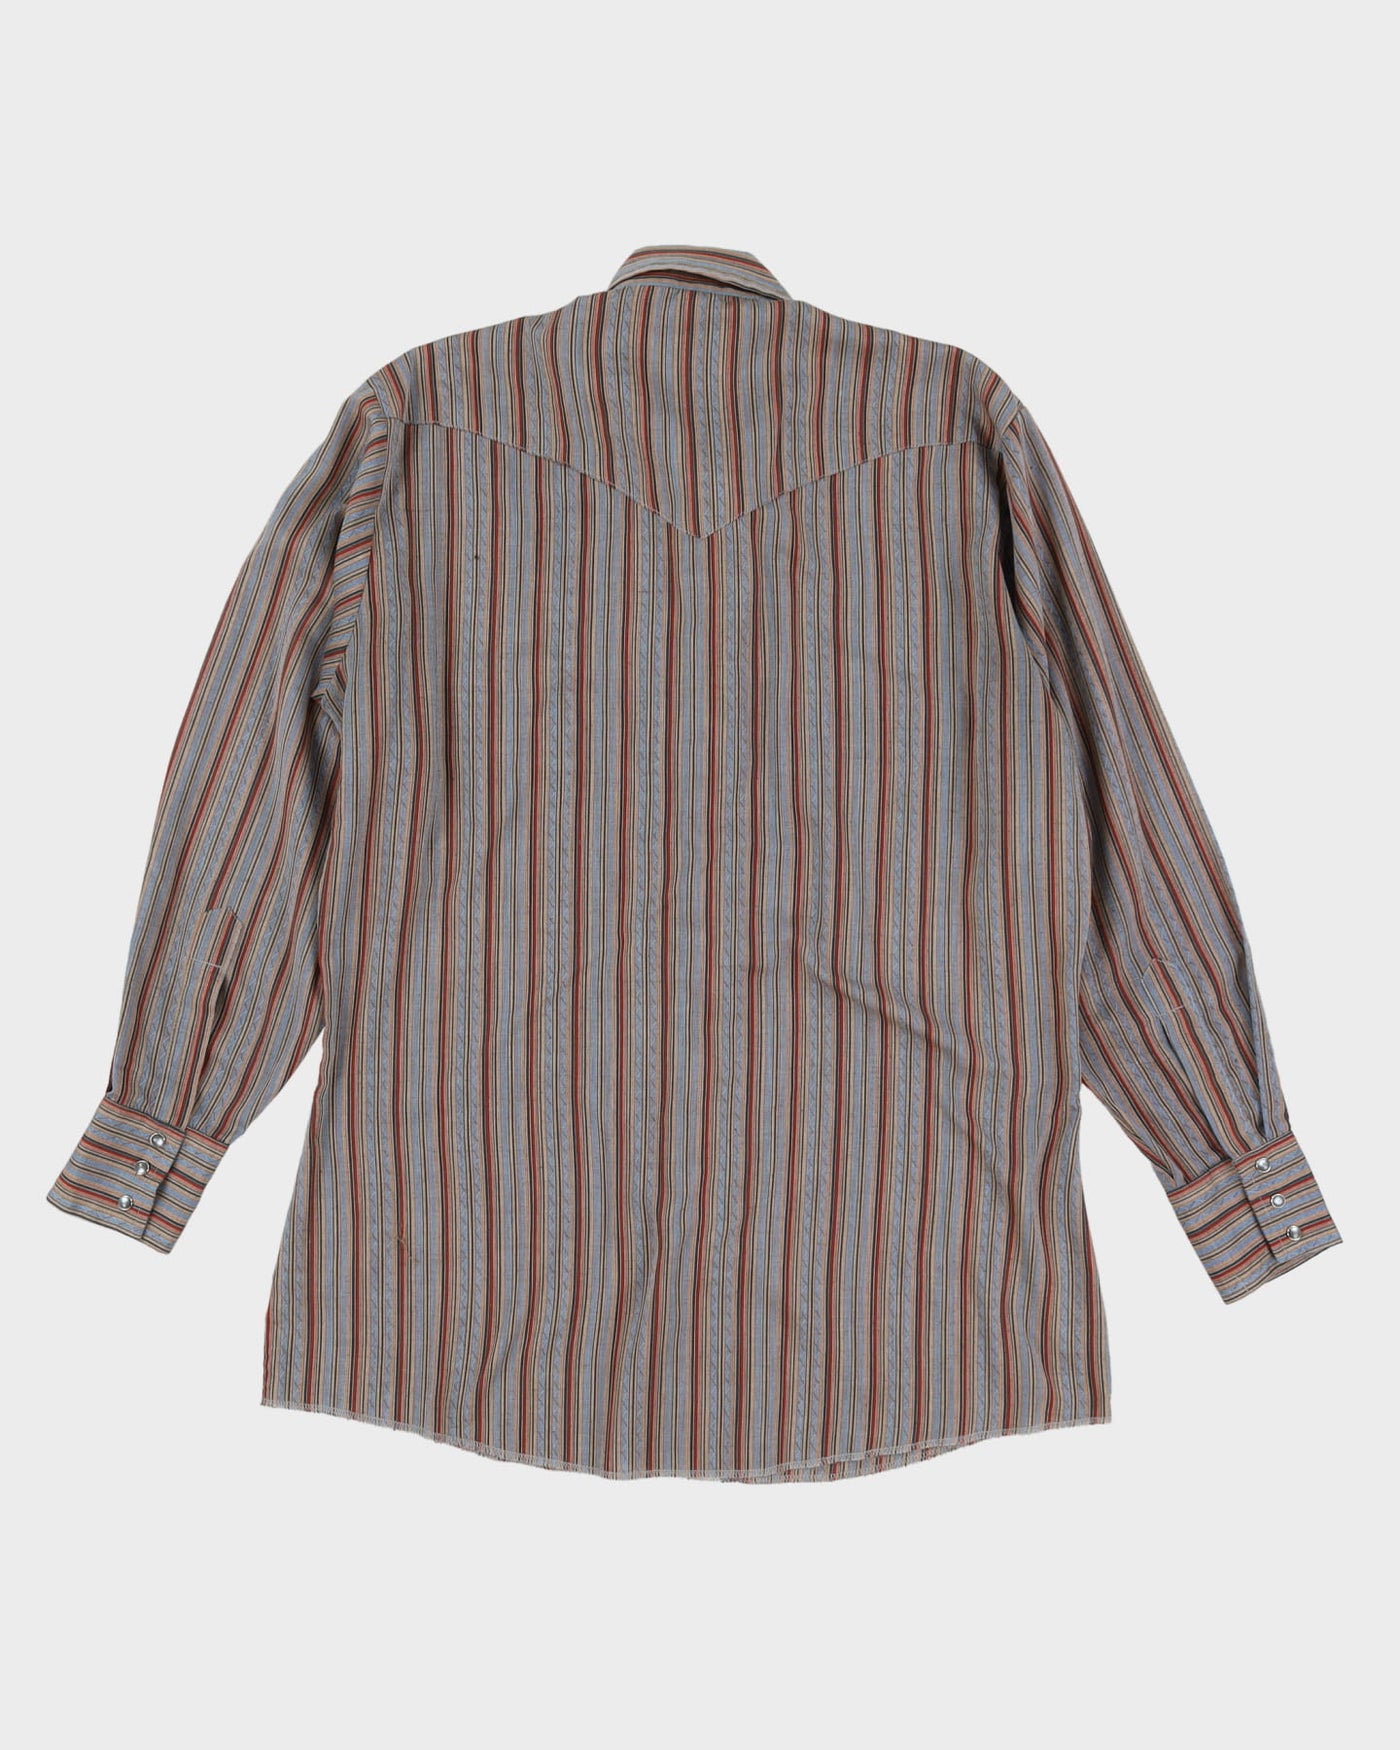 80s Champion Western Long-Sleeve Button-Up Shirt - L